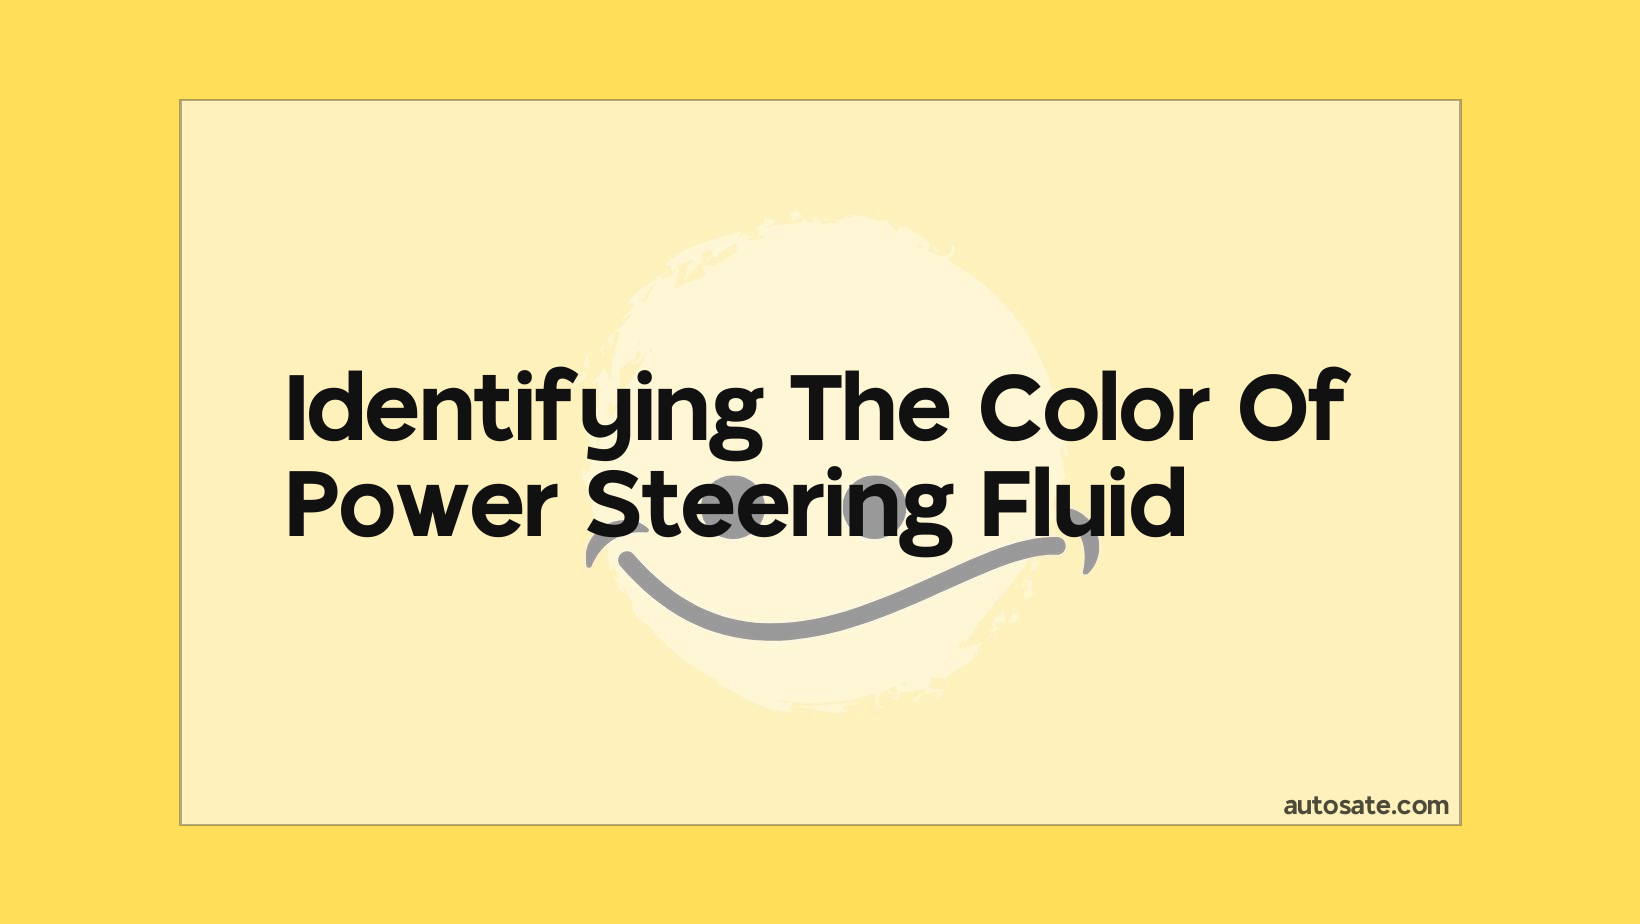 Identifying The Color Of Power Steering Fluid